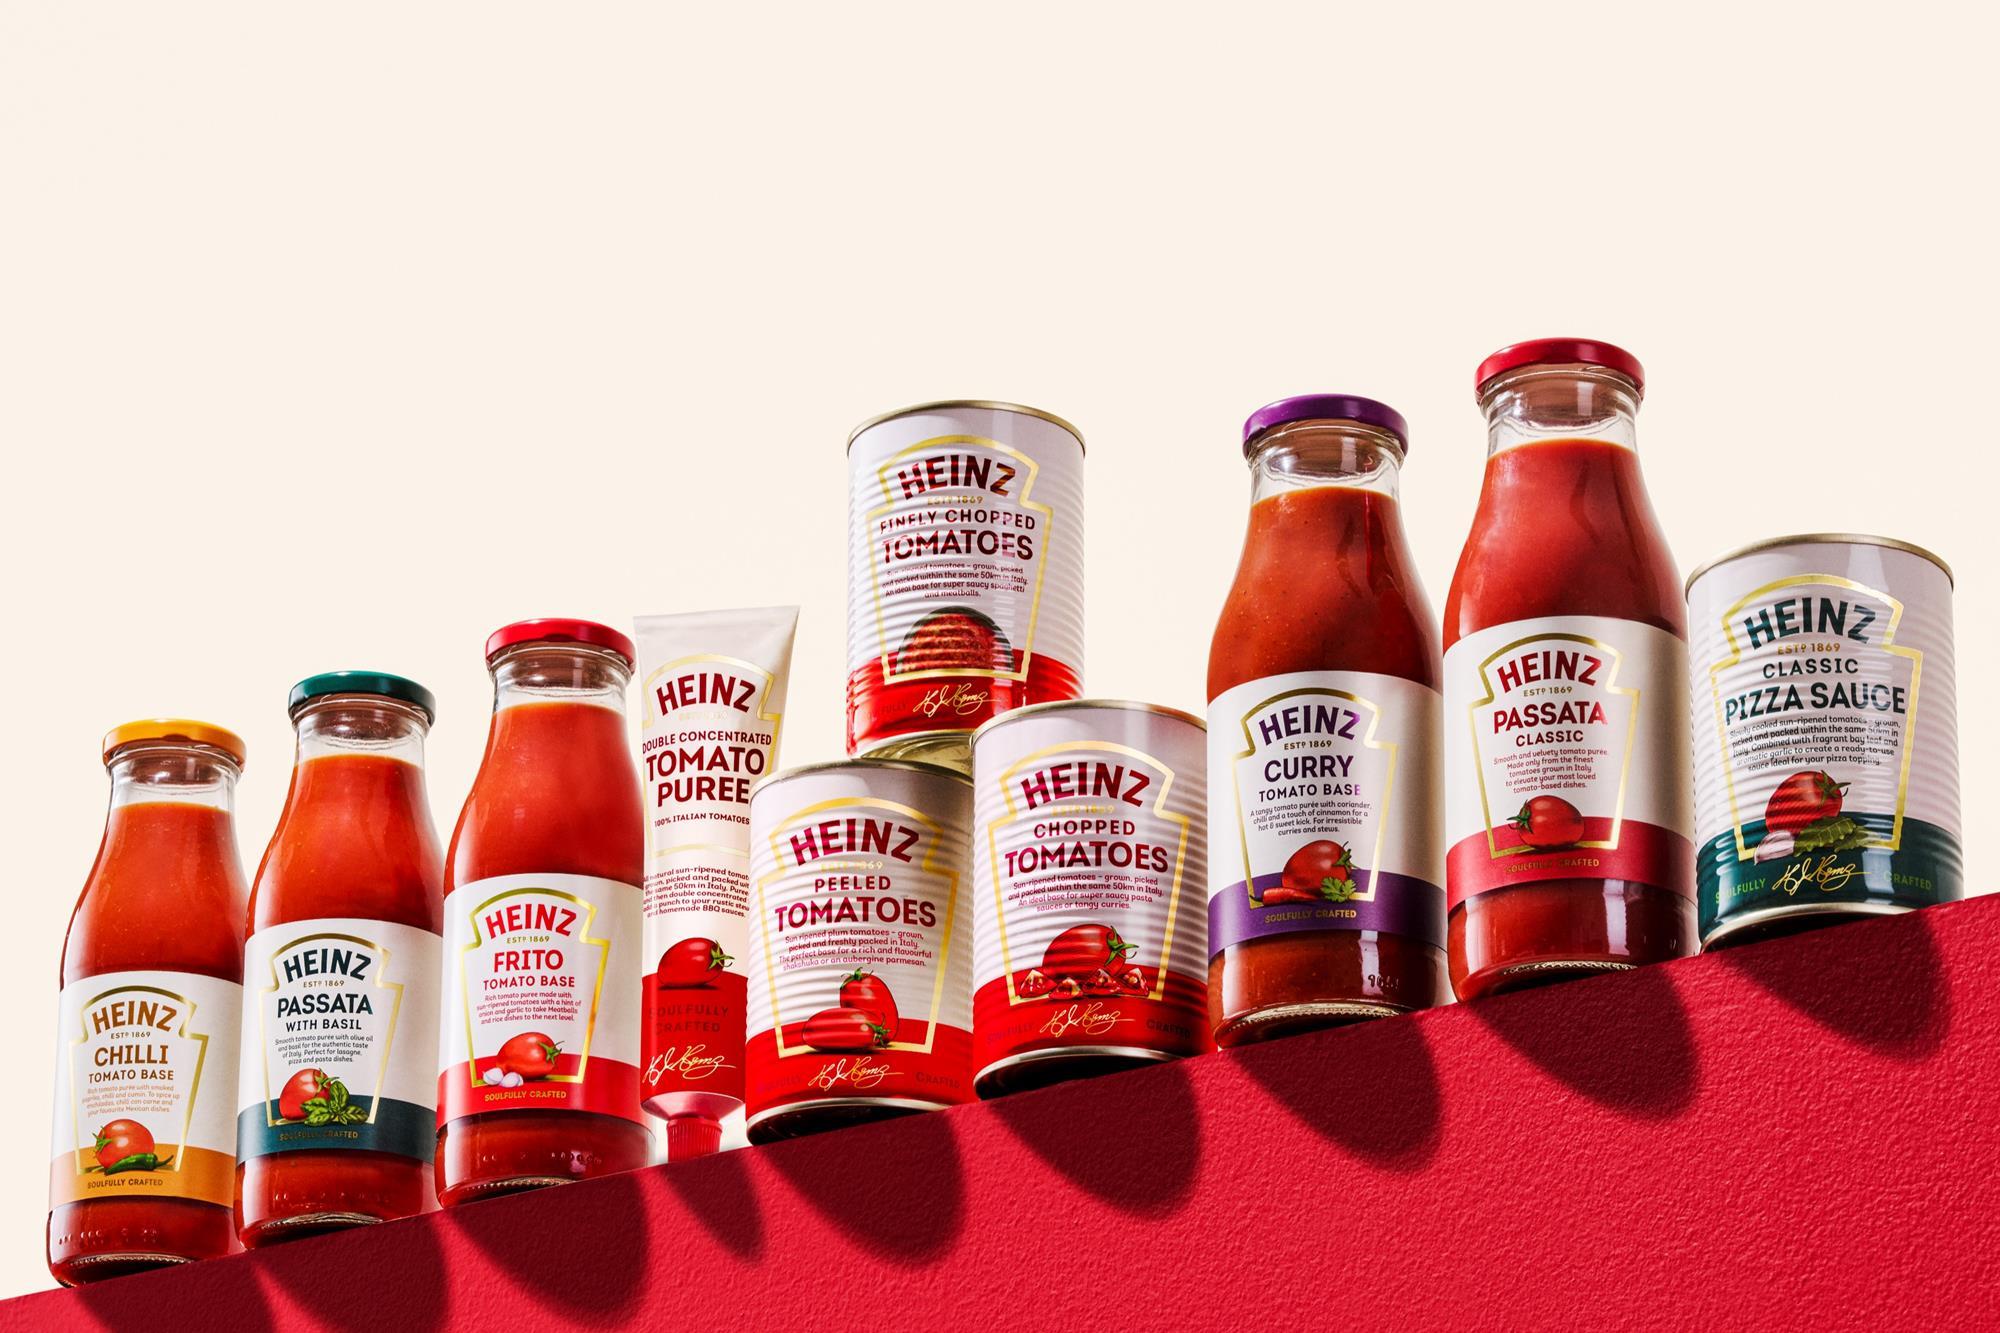 Heinz targets home cooks with tomato-based ingredients range, News